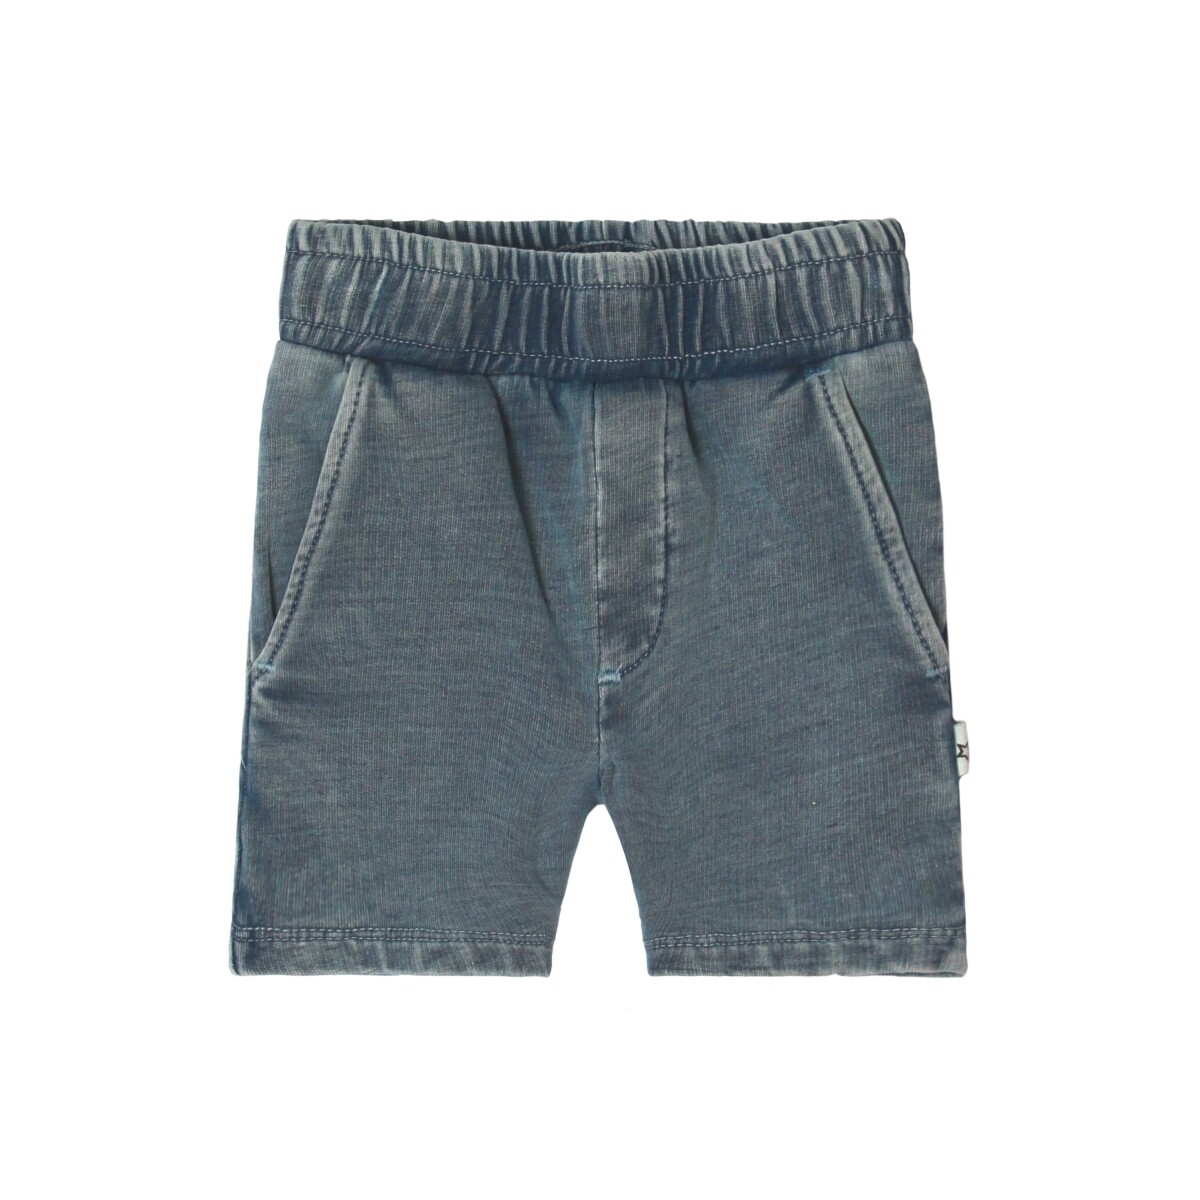 Your Wishes Short Knitted Denim